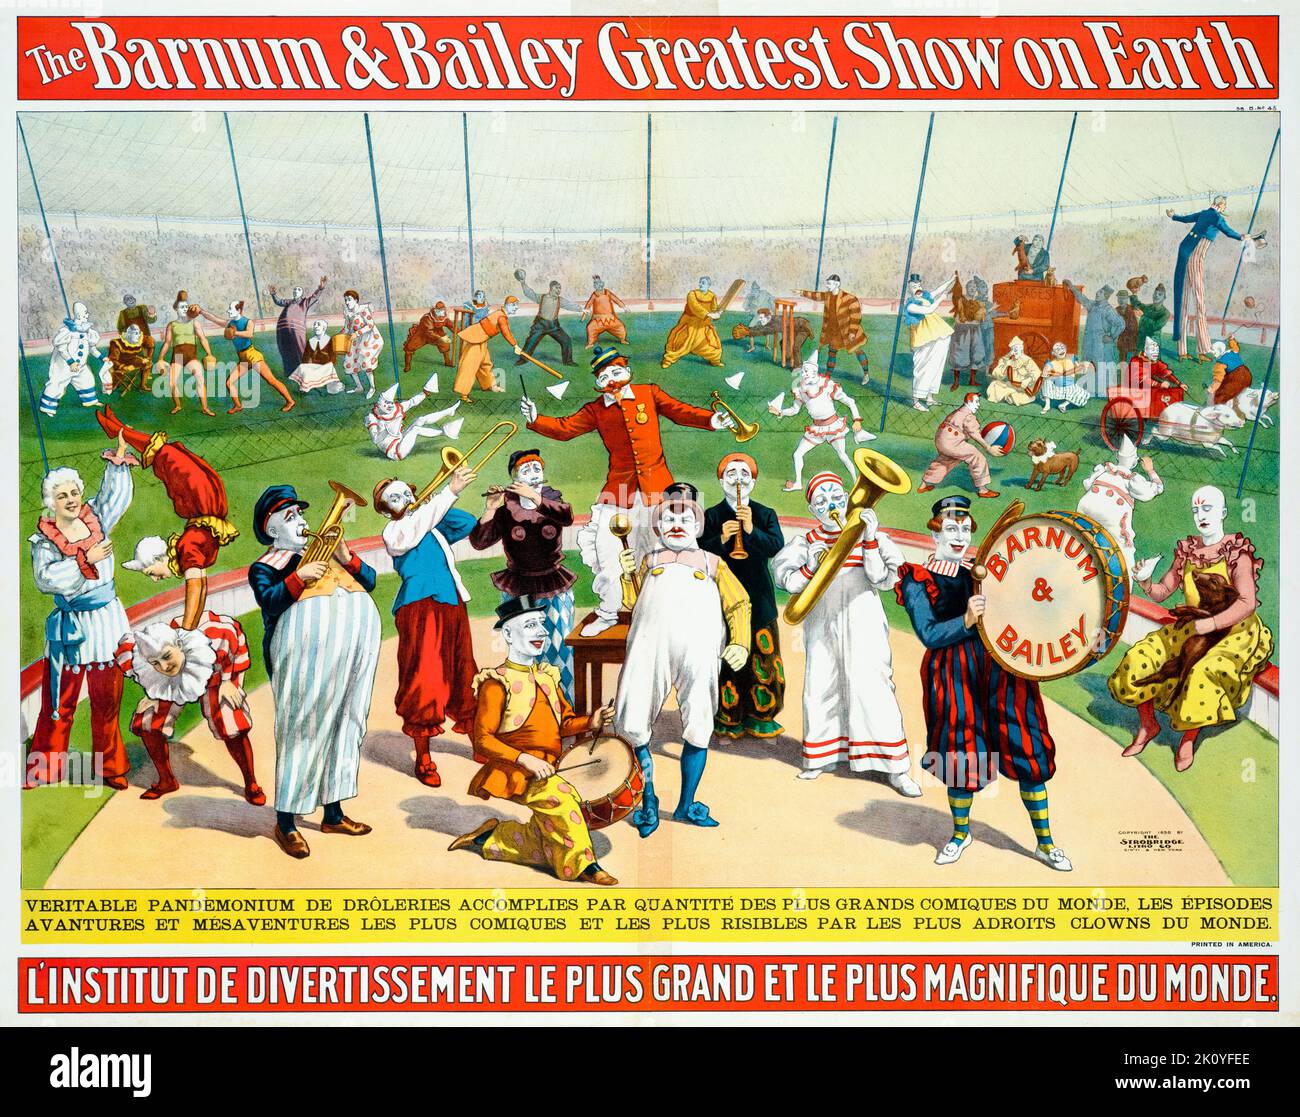 The Barnum & Bailey Greatest Show on Earth, Circus Poster in francese, di Strobridge Lithograph Company, 1898 Foto Stock